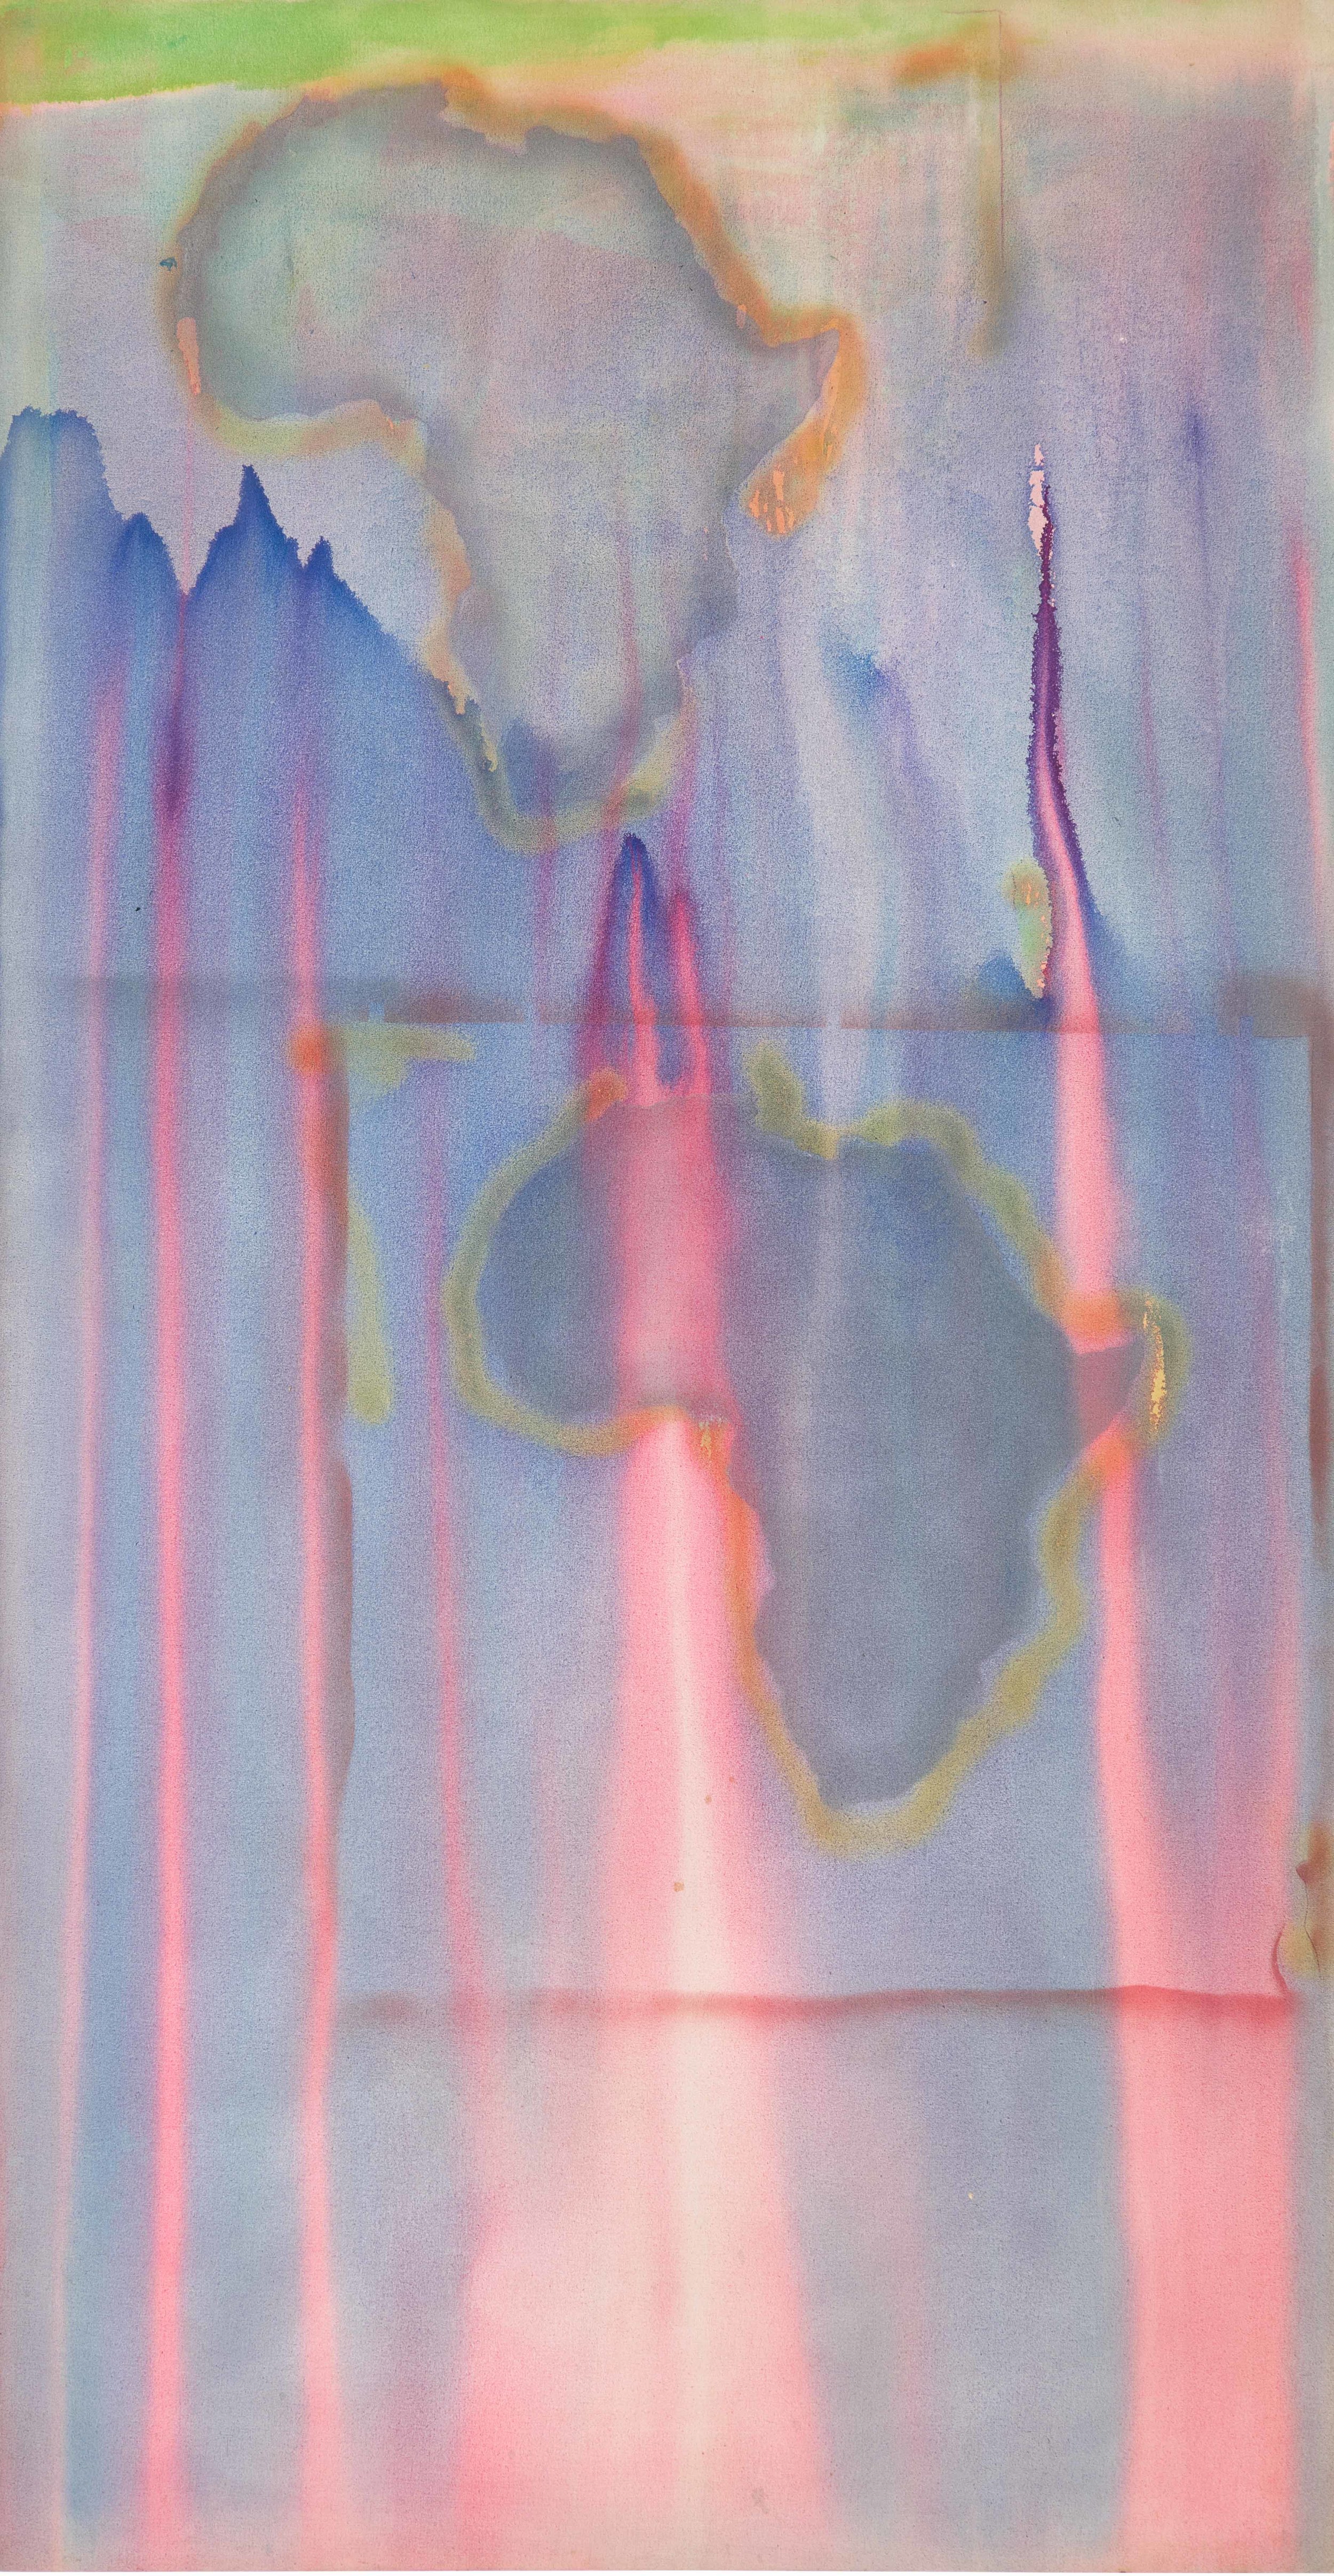   Barticaborn   I , 1967, Acrylic paint, spray paint, and oil wax on canvas, 2340 x 1224 mm, Lowinger Family Collection © Frank Bowling. All Rights Reserved, DACS 2019 